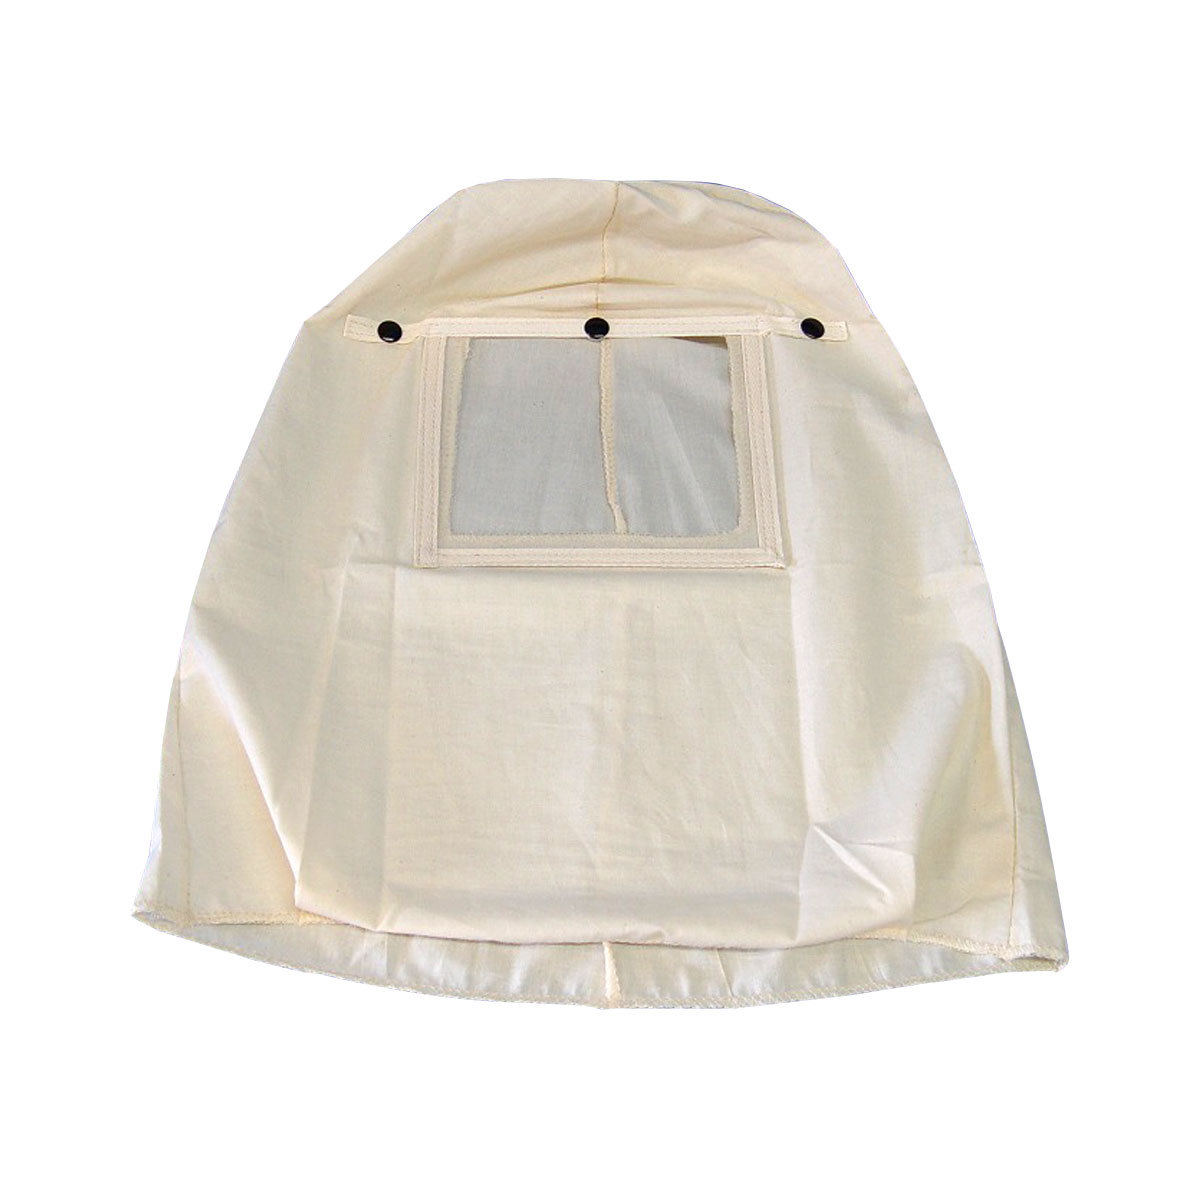 Chicago Protective Apparel One Size Fits All Natural Muslin Hood